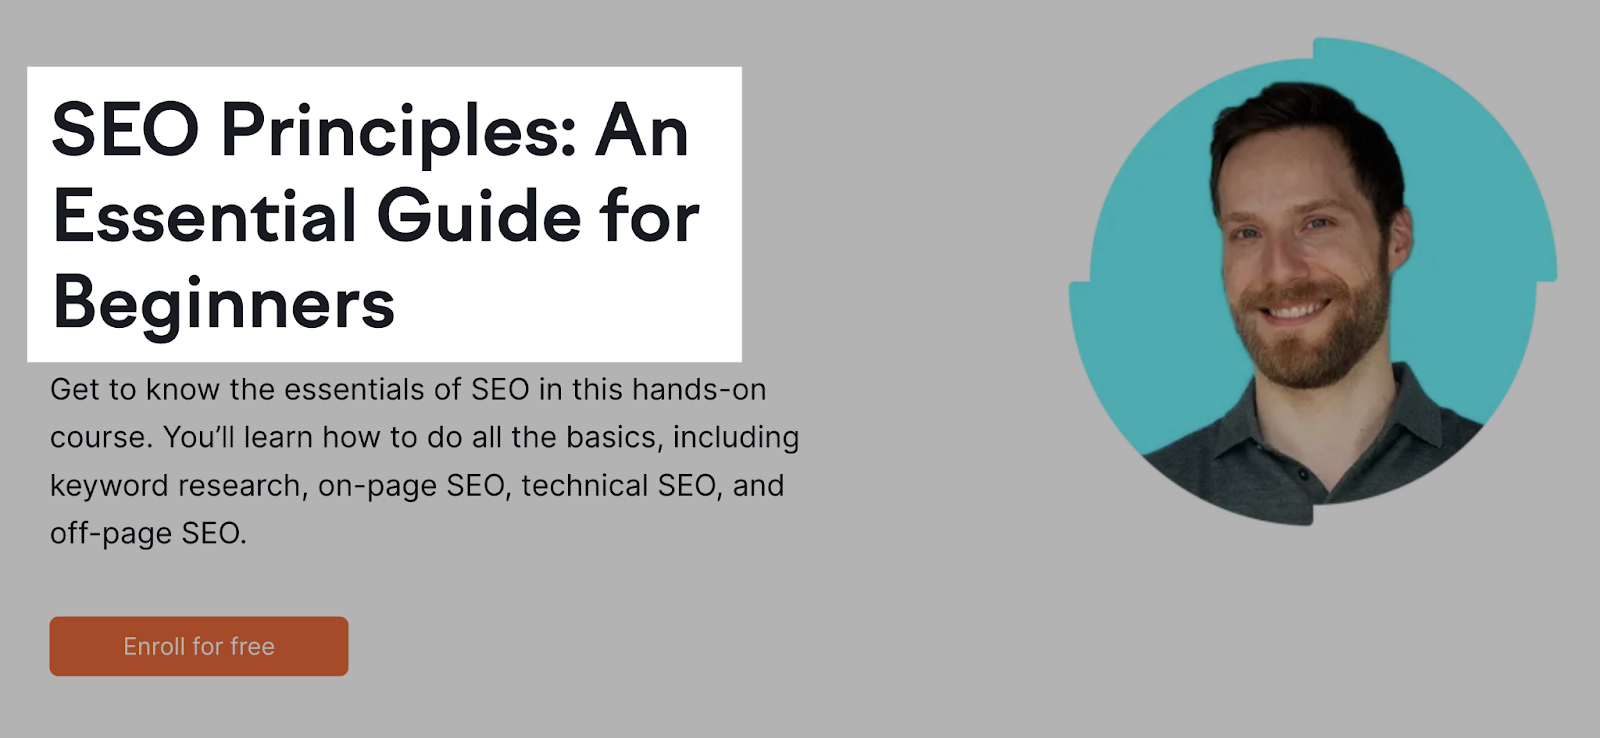 Semrush Academy course's H1 tag that reads: "SEO Principles: An Essential Guide for Beginners"